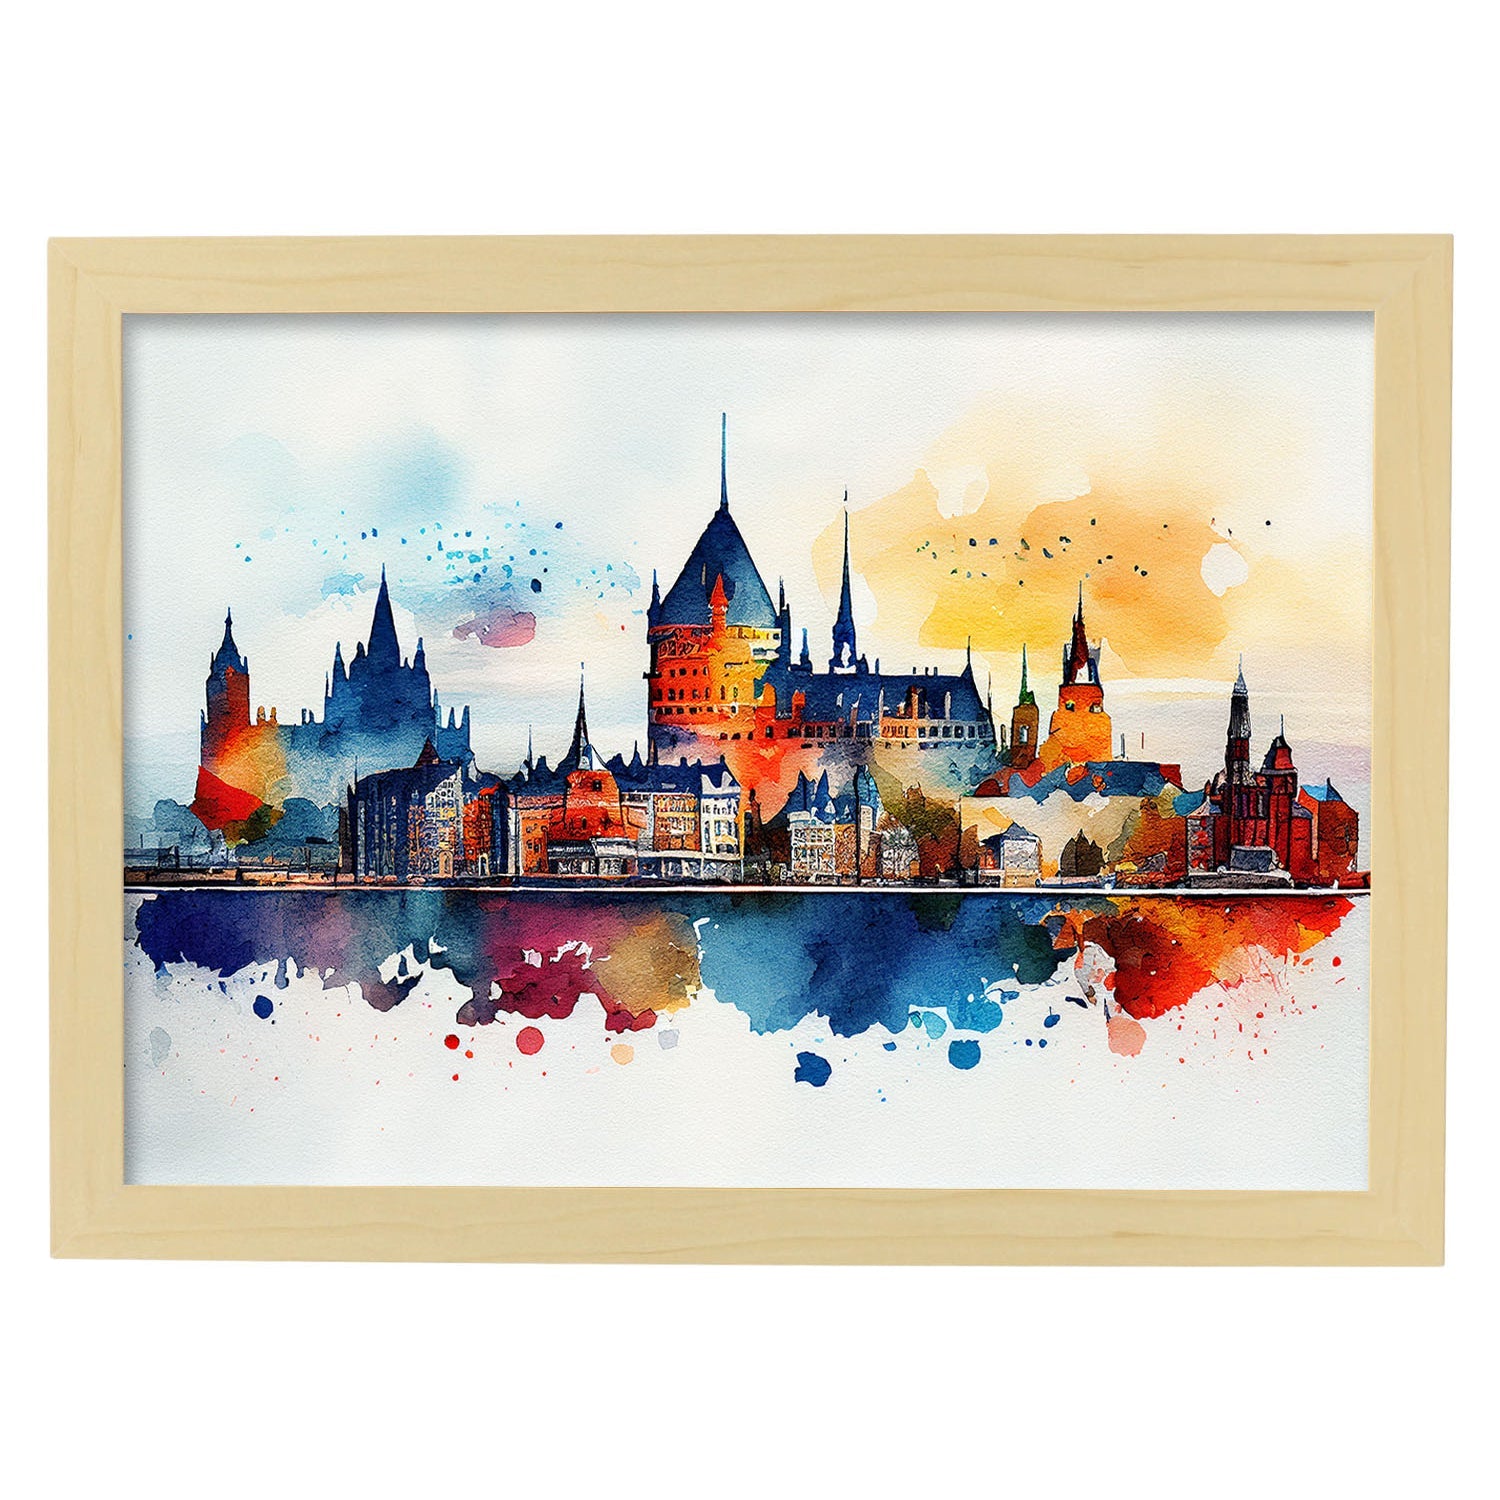 Nacnic watercolor of a skyline of the city of Quebec City. Aesthetic Wall Art Prints for Bedroom or Living Room Design.-Artwork-Nacnic-A4-Marco Madera Clara-Nacnic Estudio SL